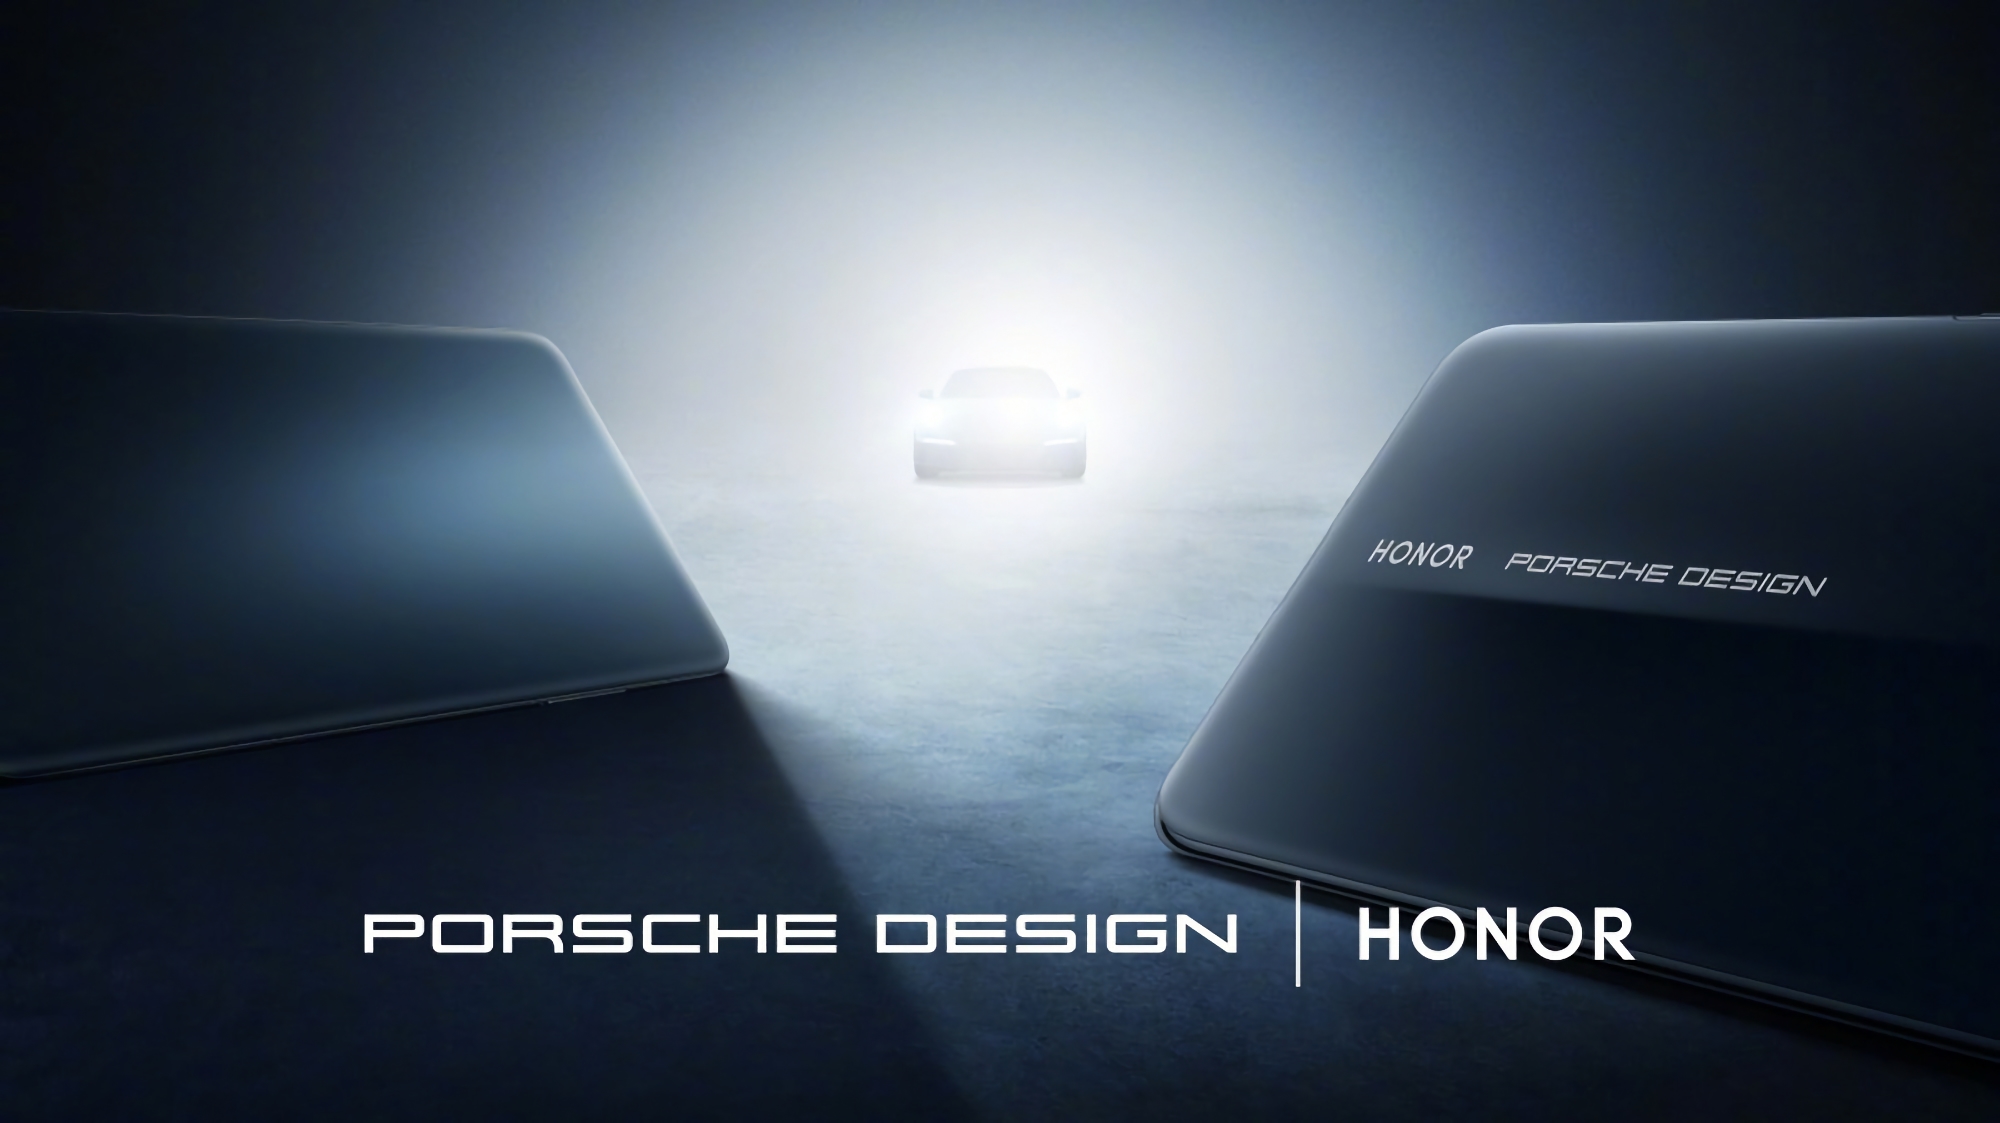 It's official: Honor will unveil Magic 6 RSR Porsche Design at the launch event on March 18